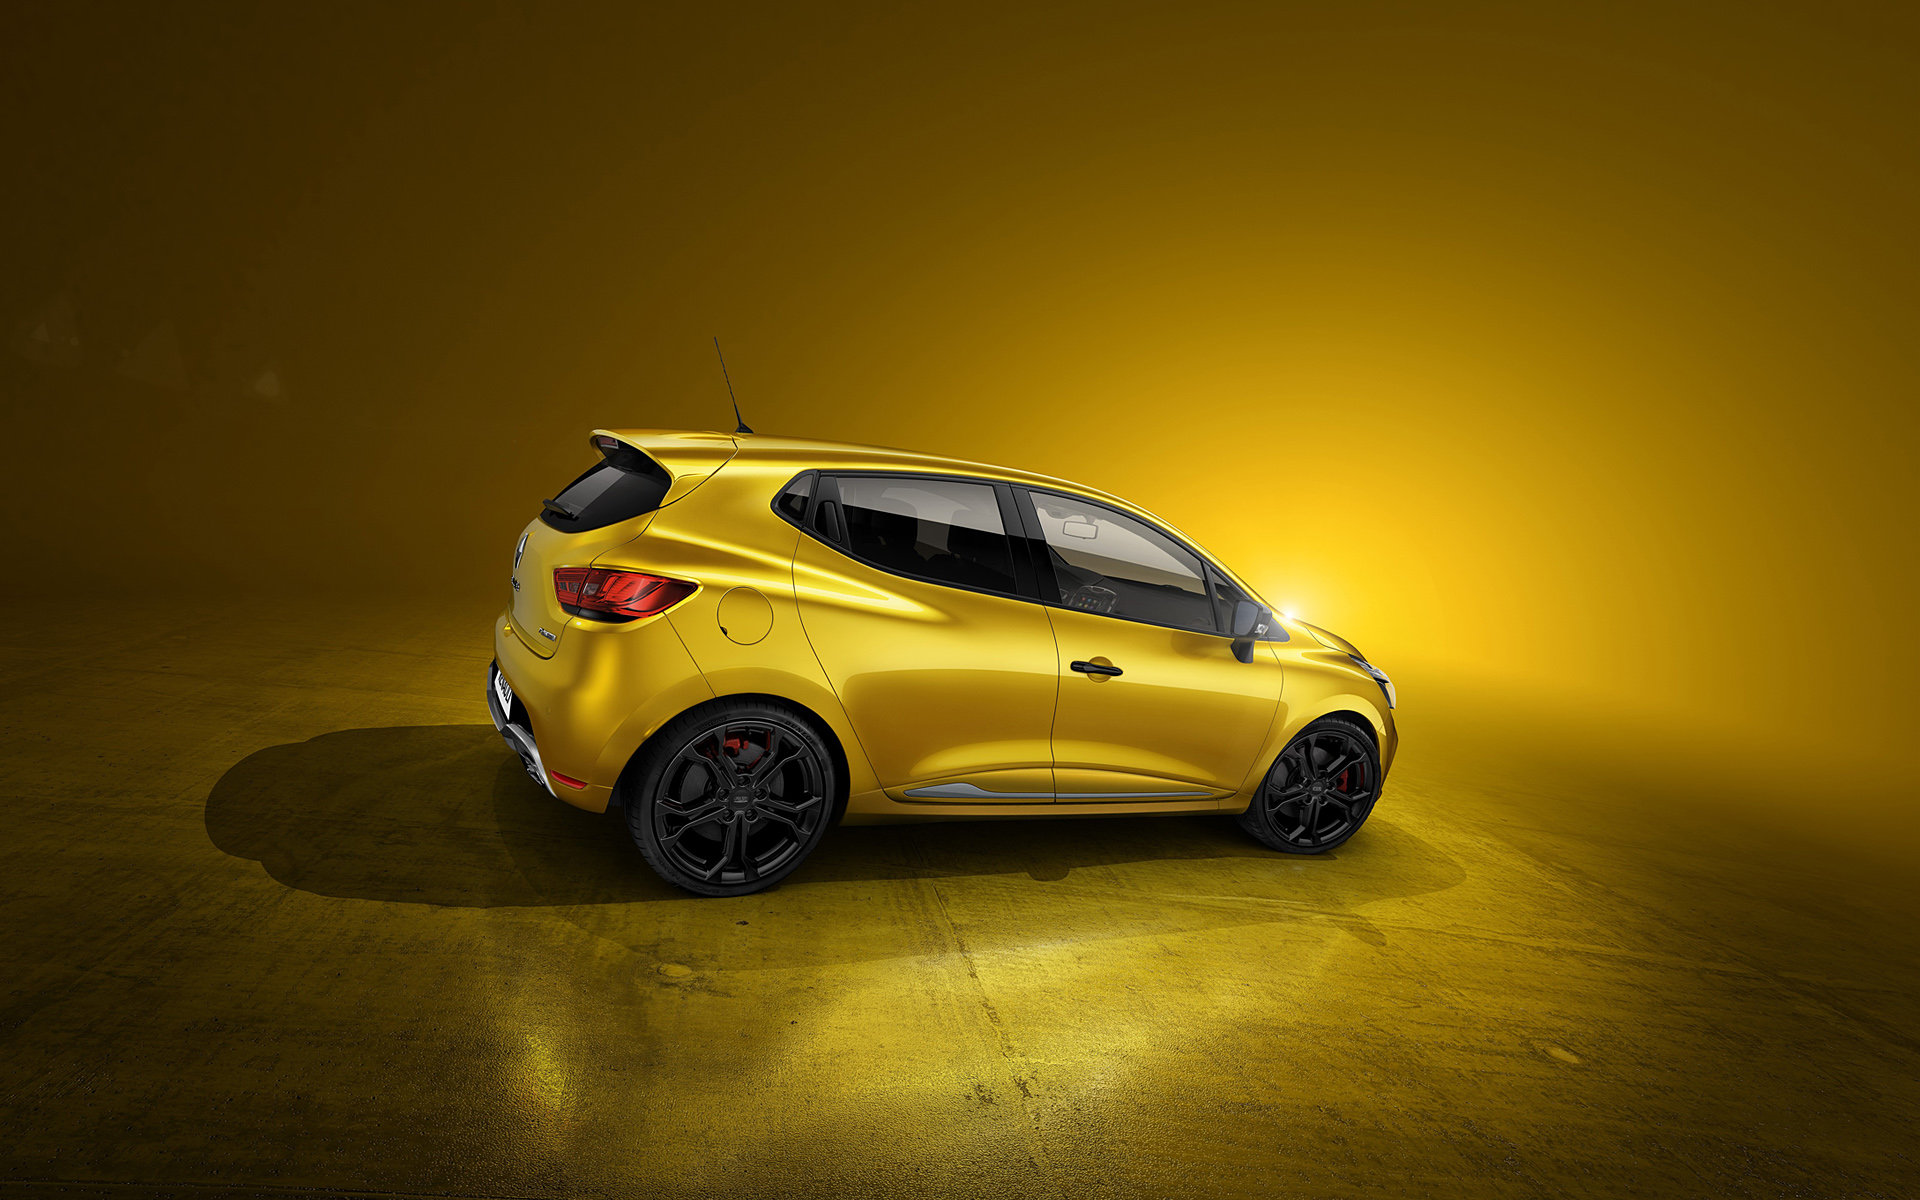 Best Renault Clio wallpaper ID:250167 for High Resolution hd 1920x1200 computer